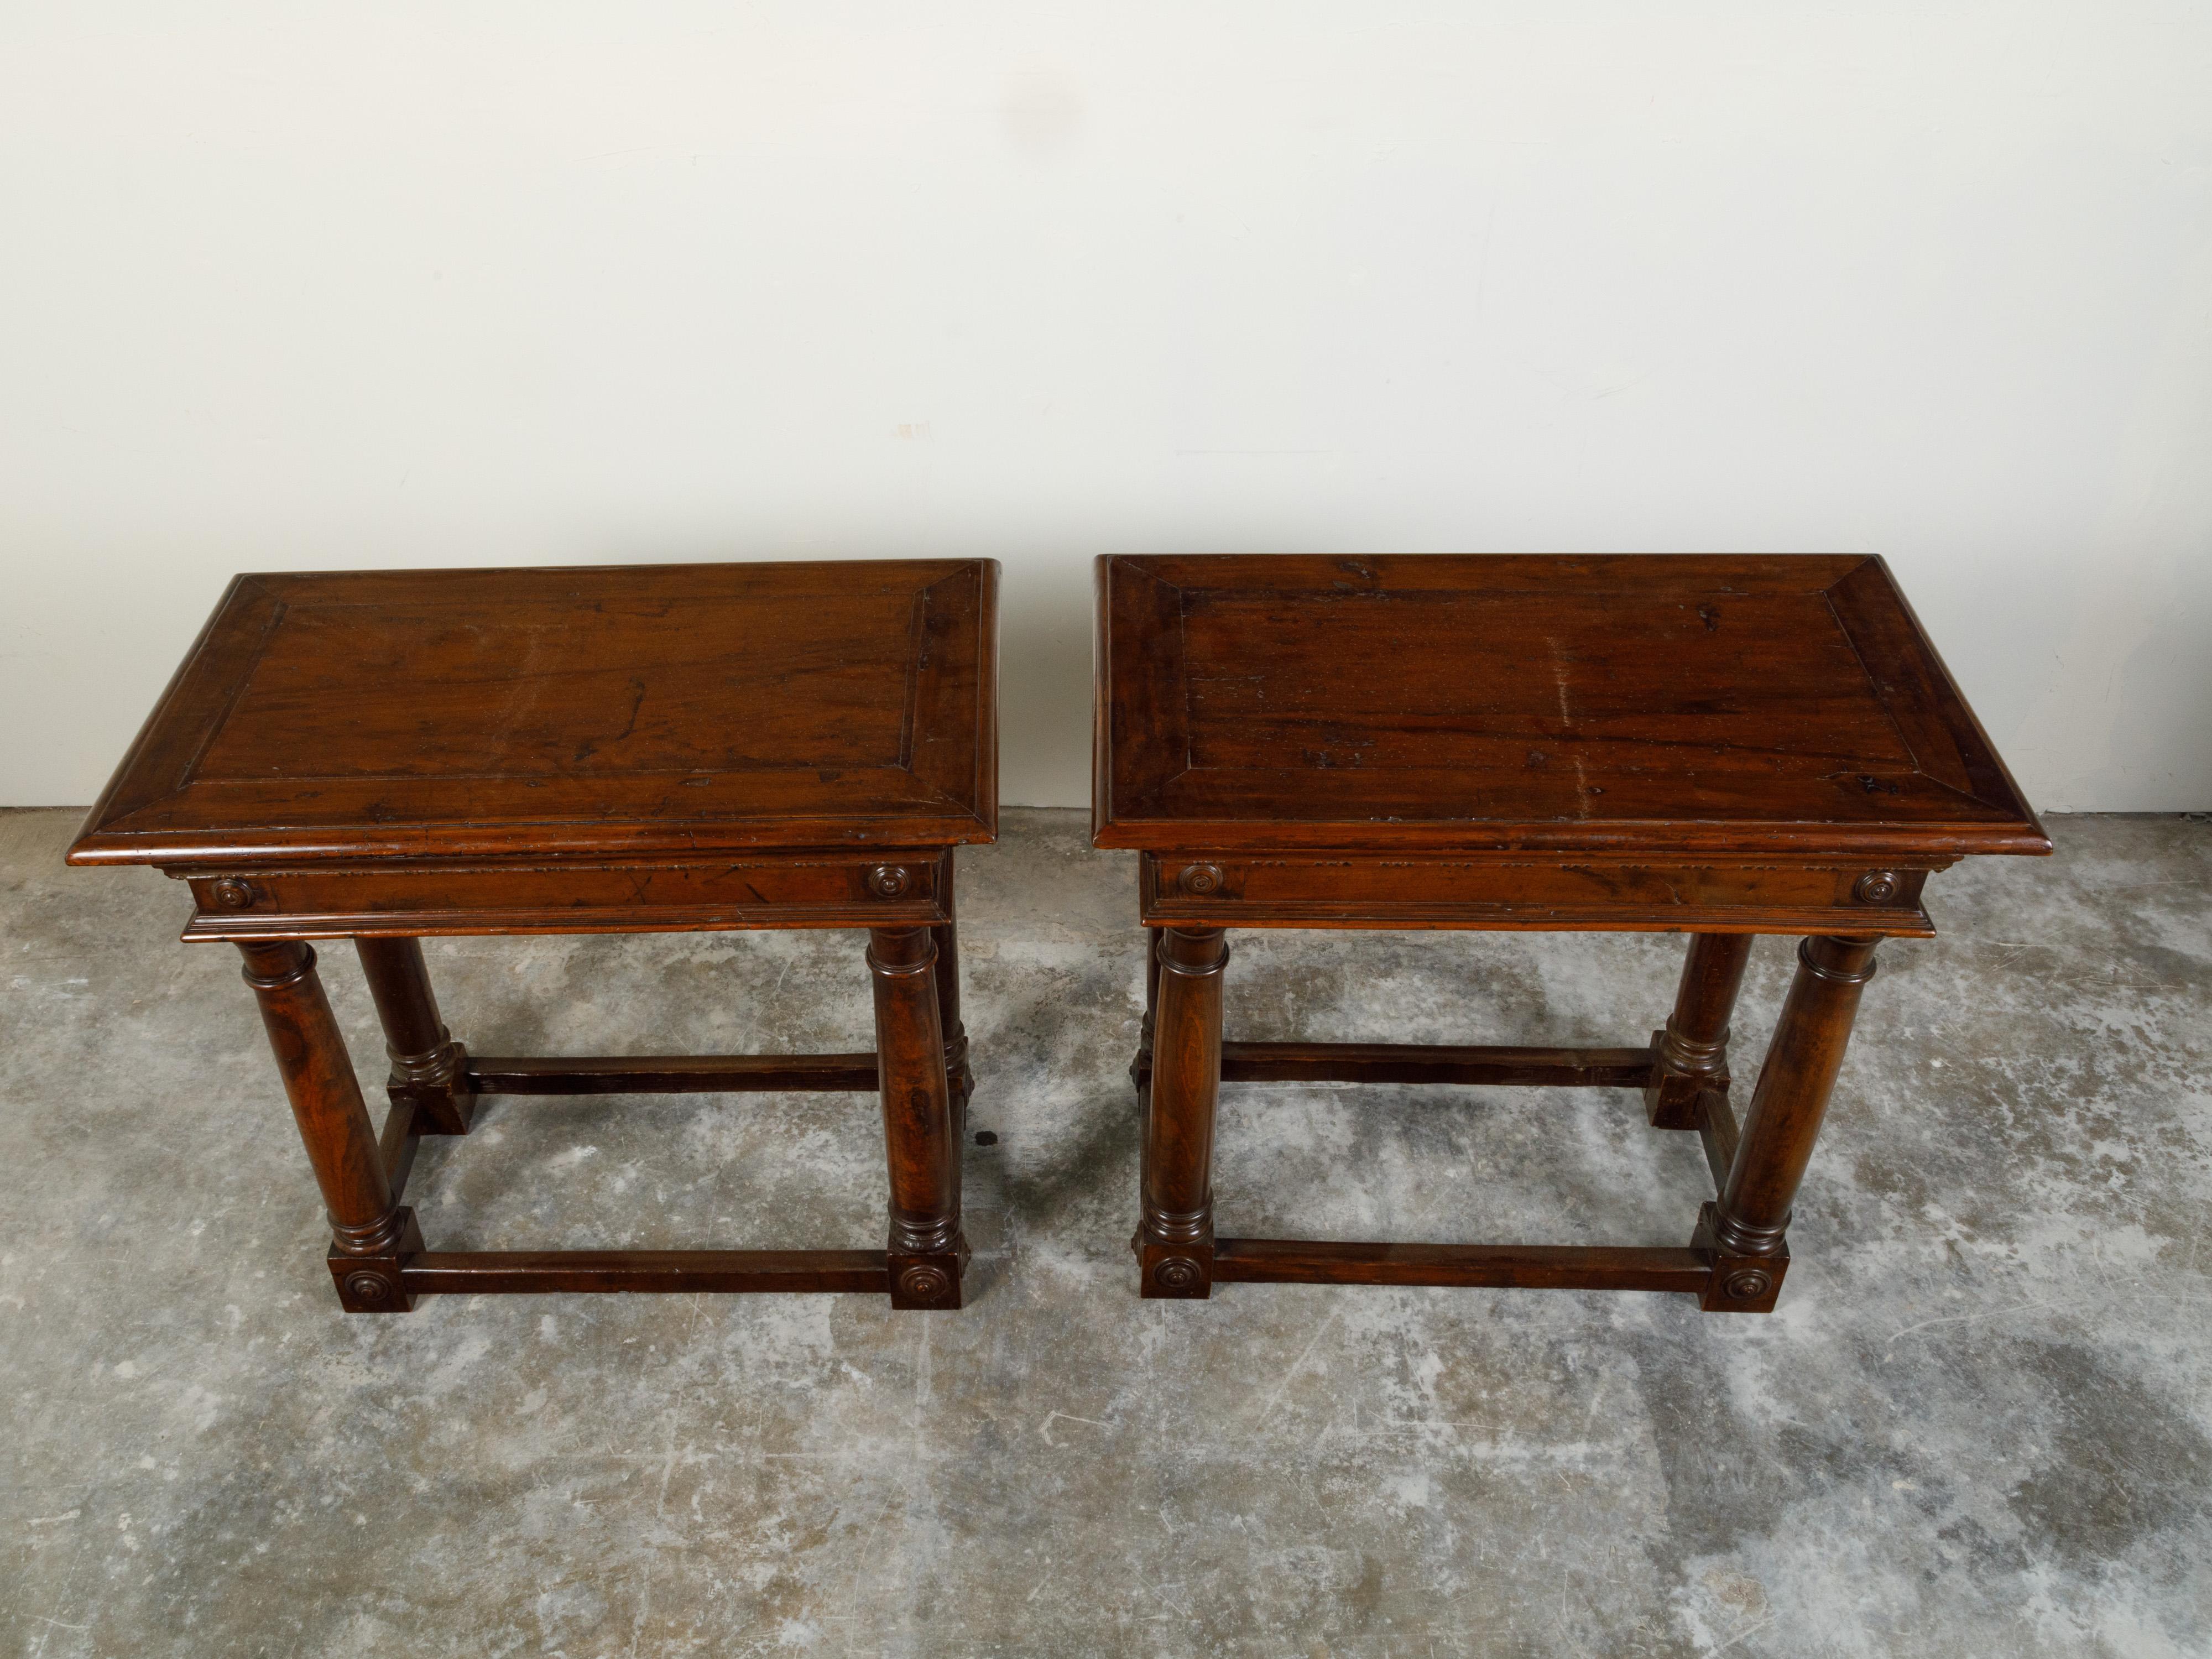 Pair of Italian 19th Century Carved Walnut Console Tables with Doric Columns In Good Condition For Sale In Atlanta, GA